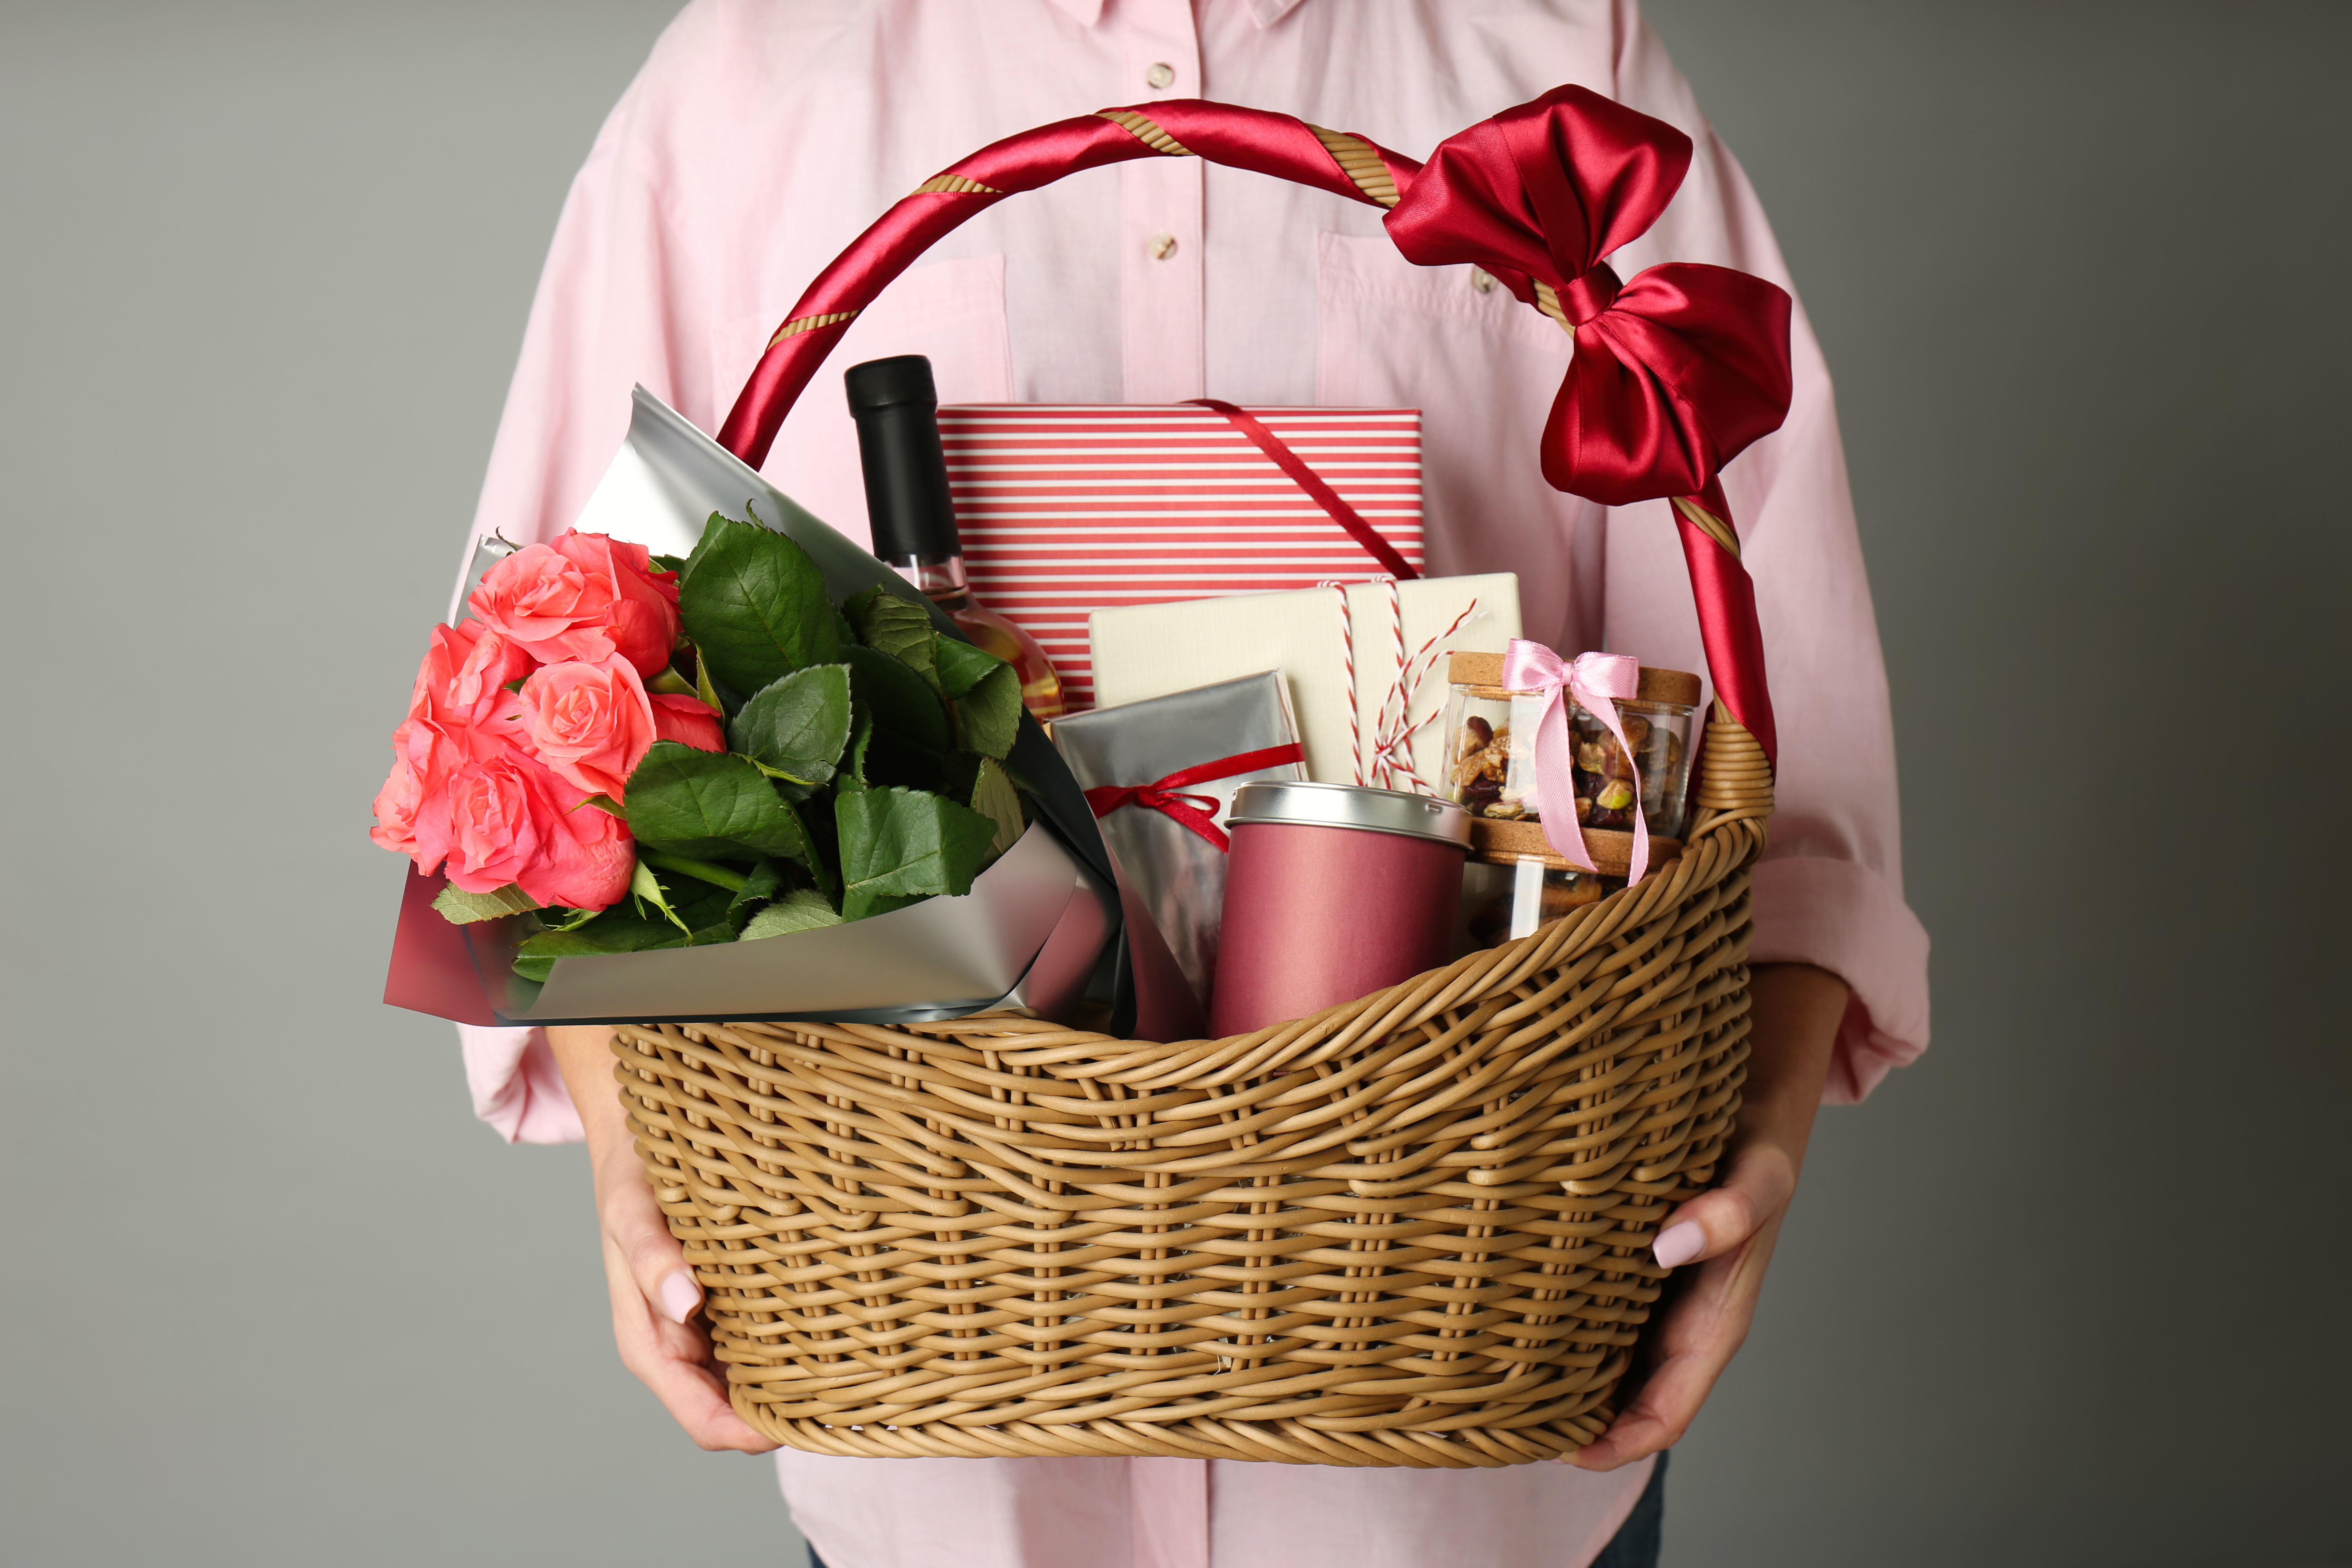 Person holding wicker basket full of presents | Source: Shutterstock